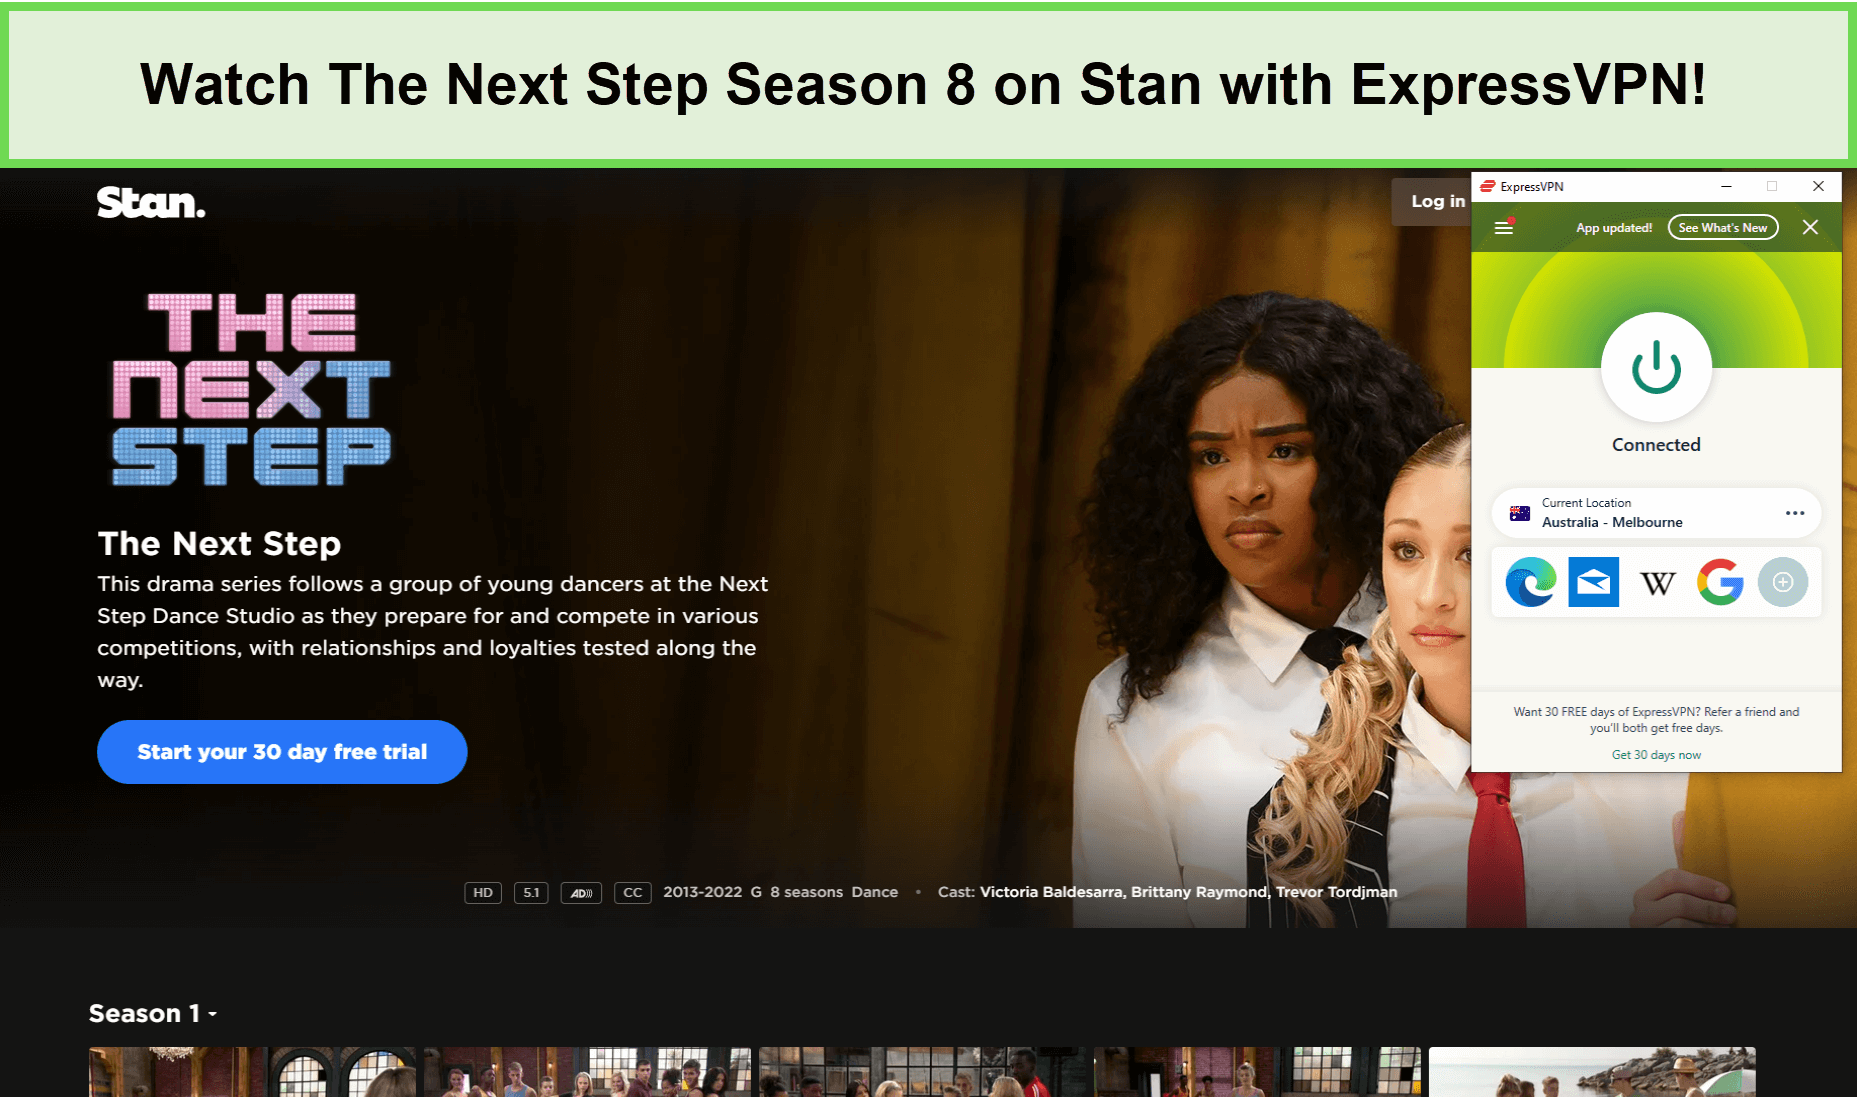 Watch-The-Next-Step-Season-8-in-Hong Kong-on-Stan-with-ExpressVPN